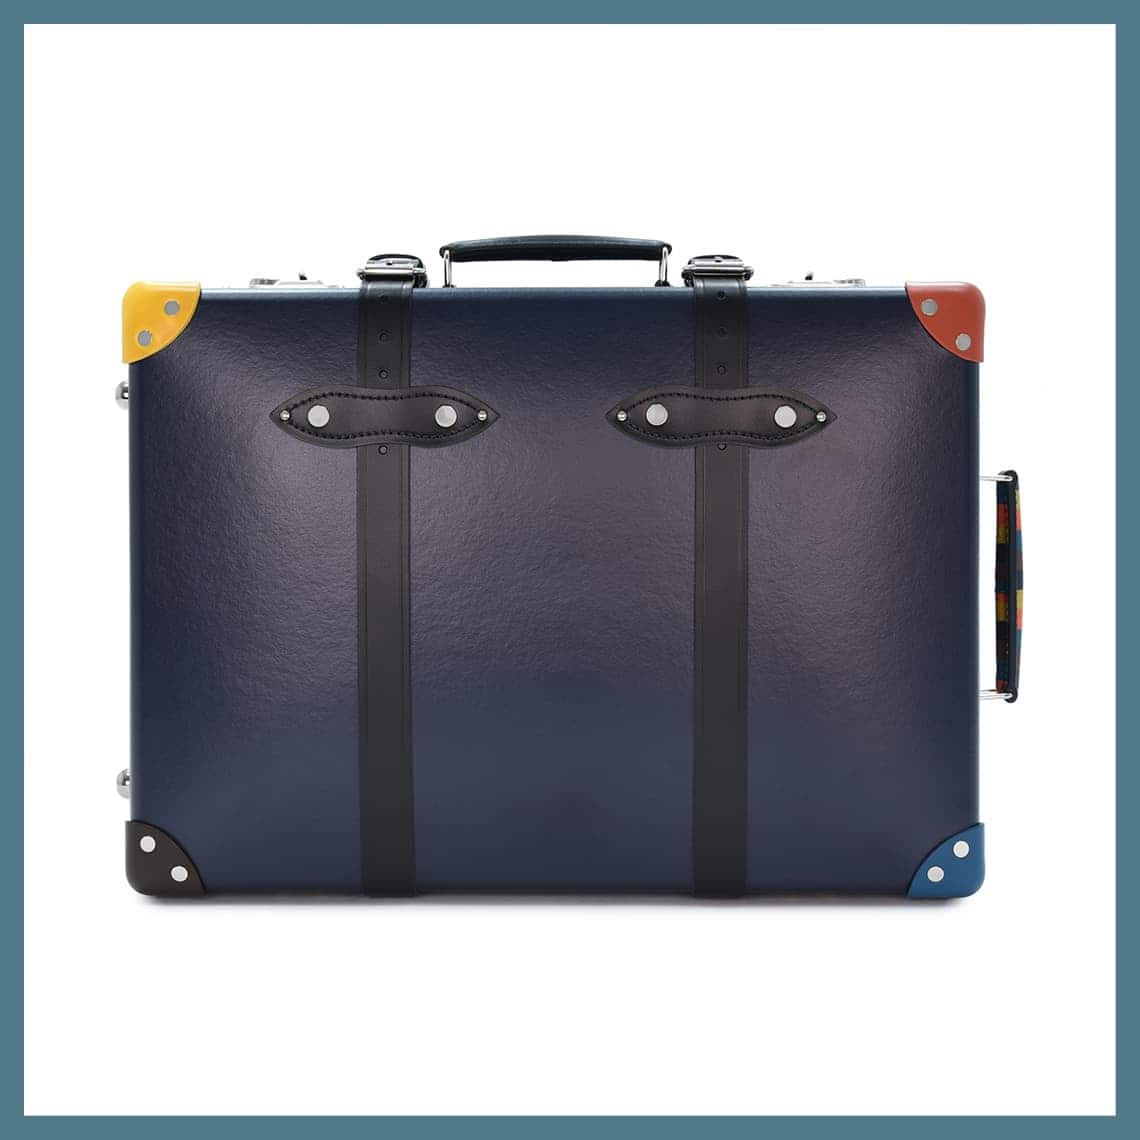 Paul Smith for Globe-Trotter 20" Trolley Case